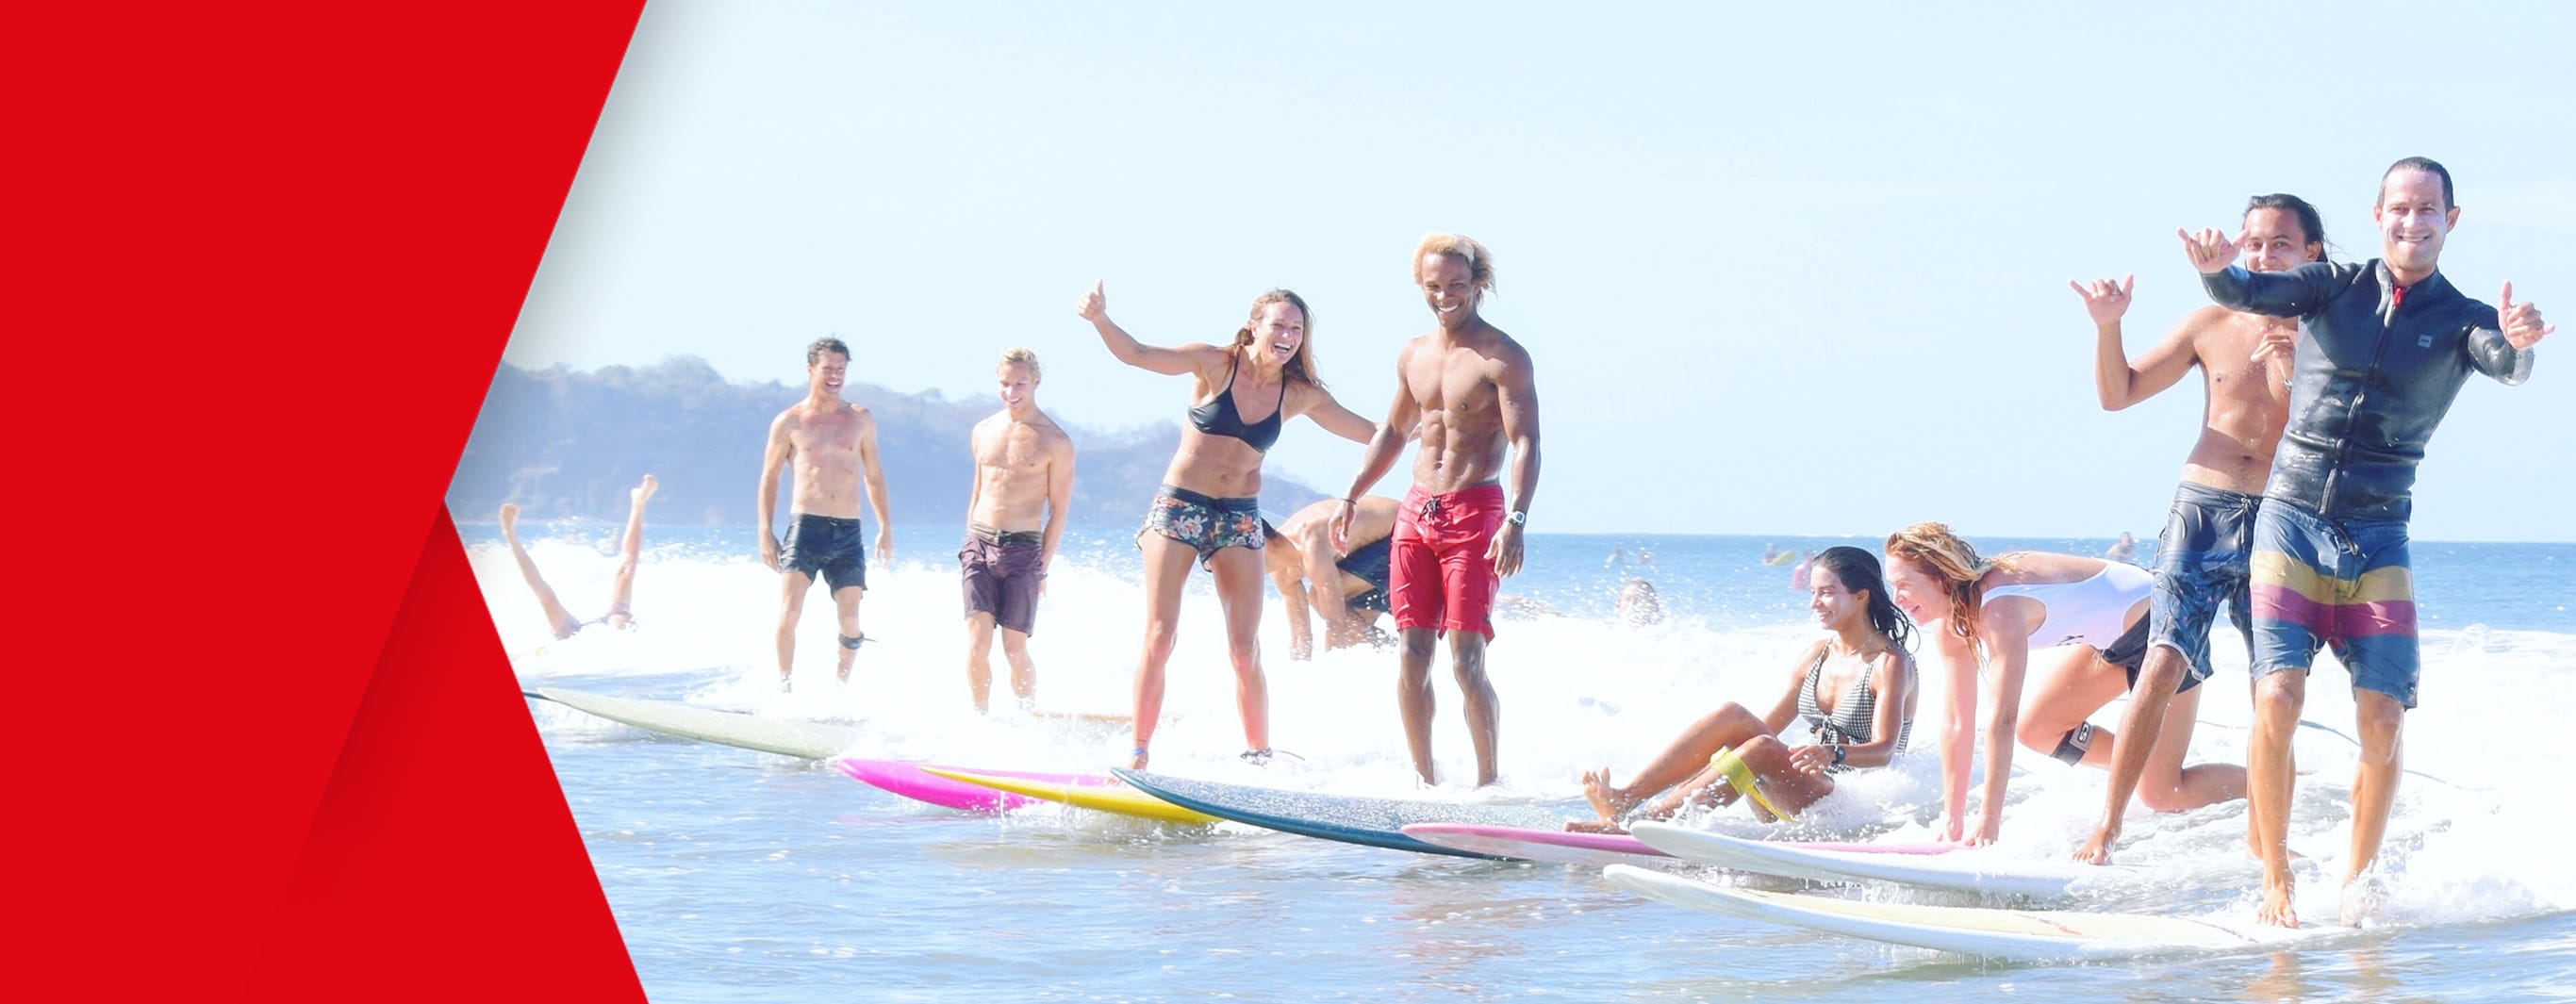 A group of nine surfers smile and wave for the camera as they ride the waves to the shore